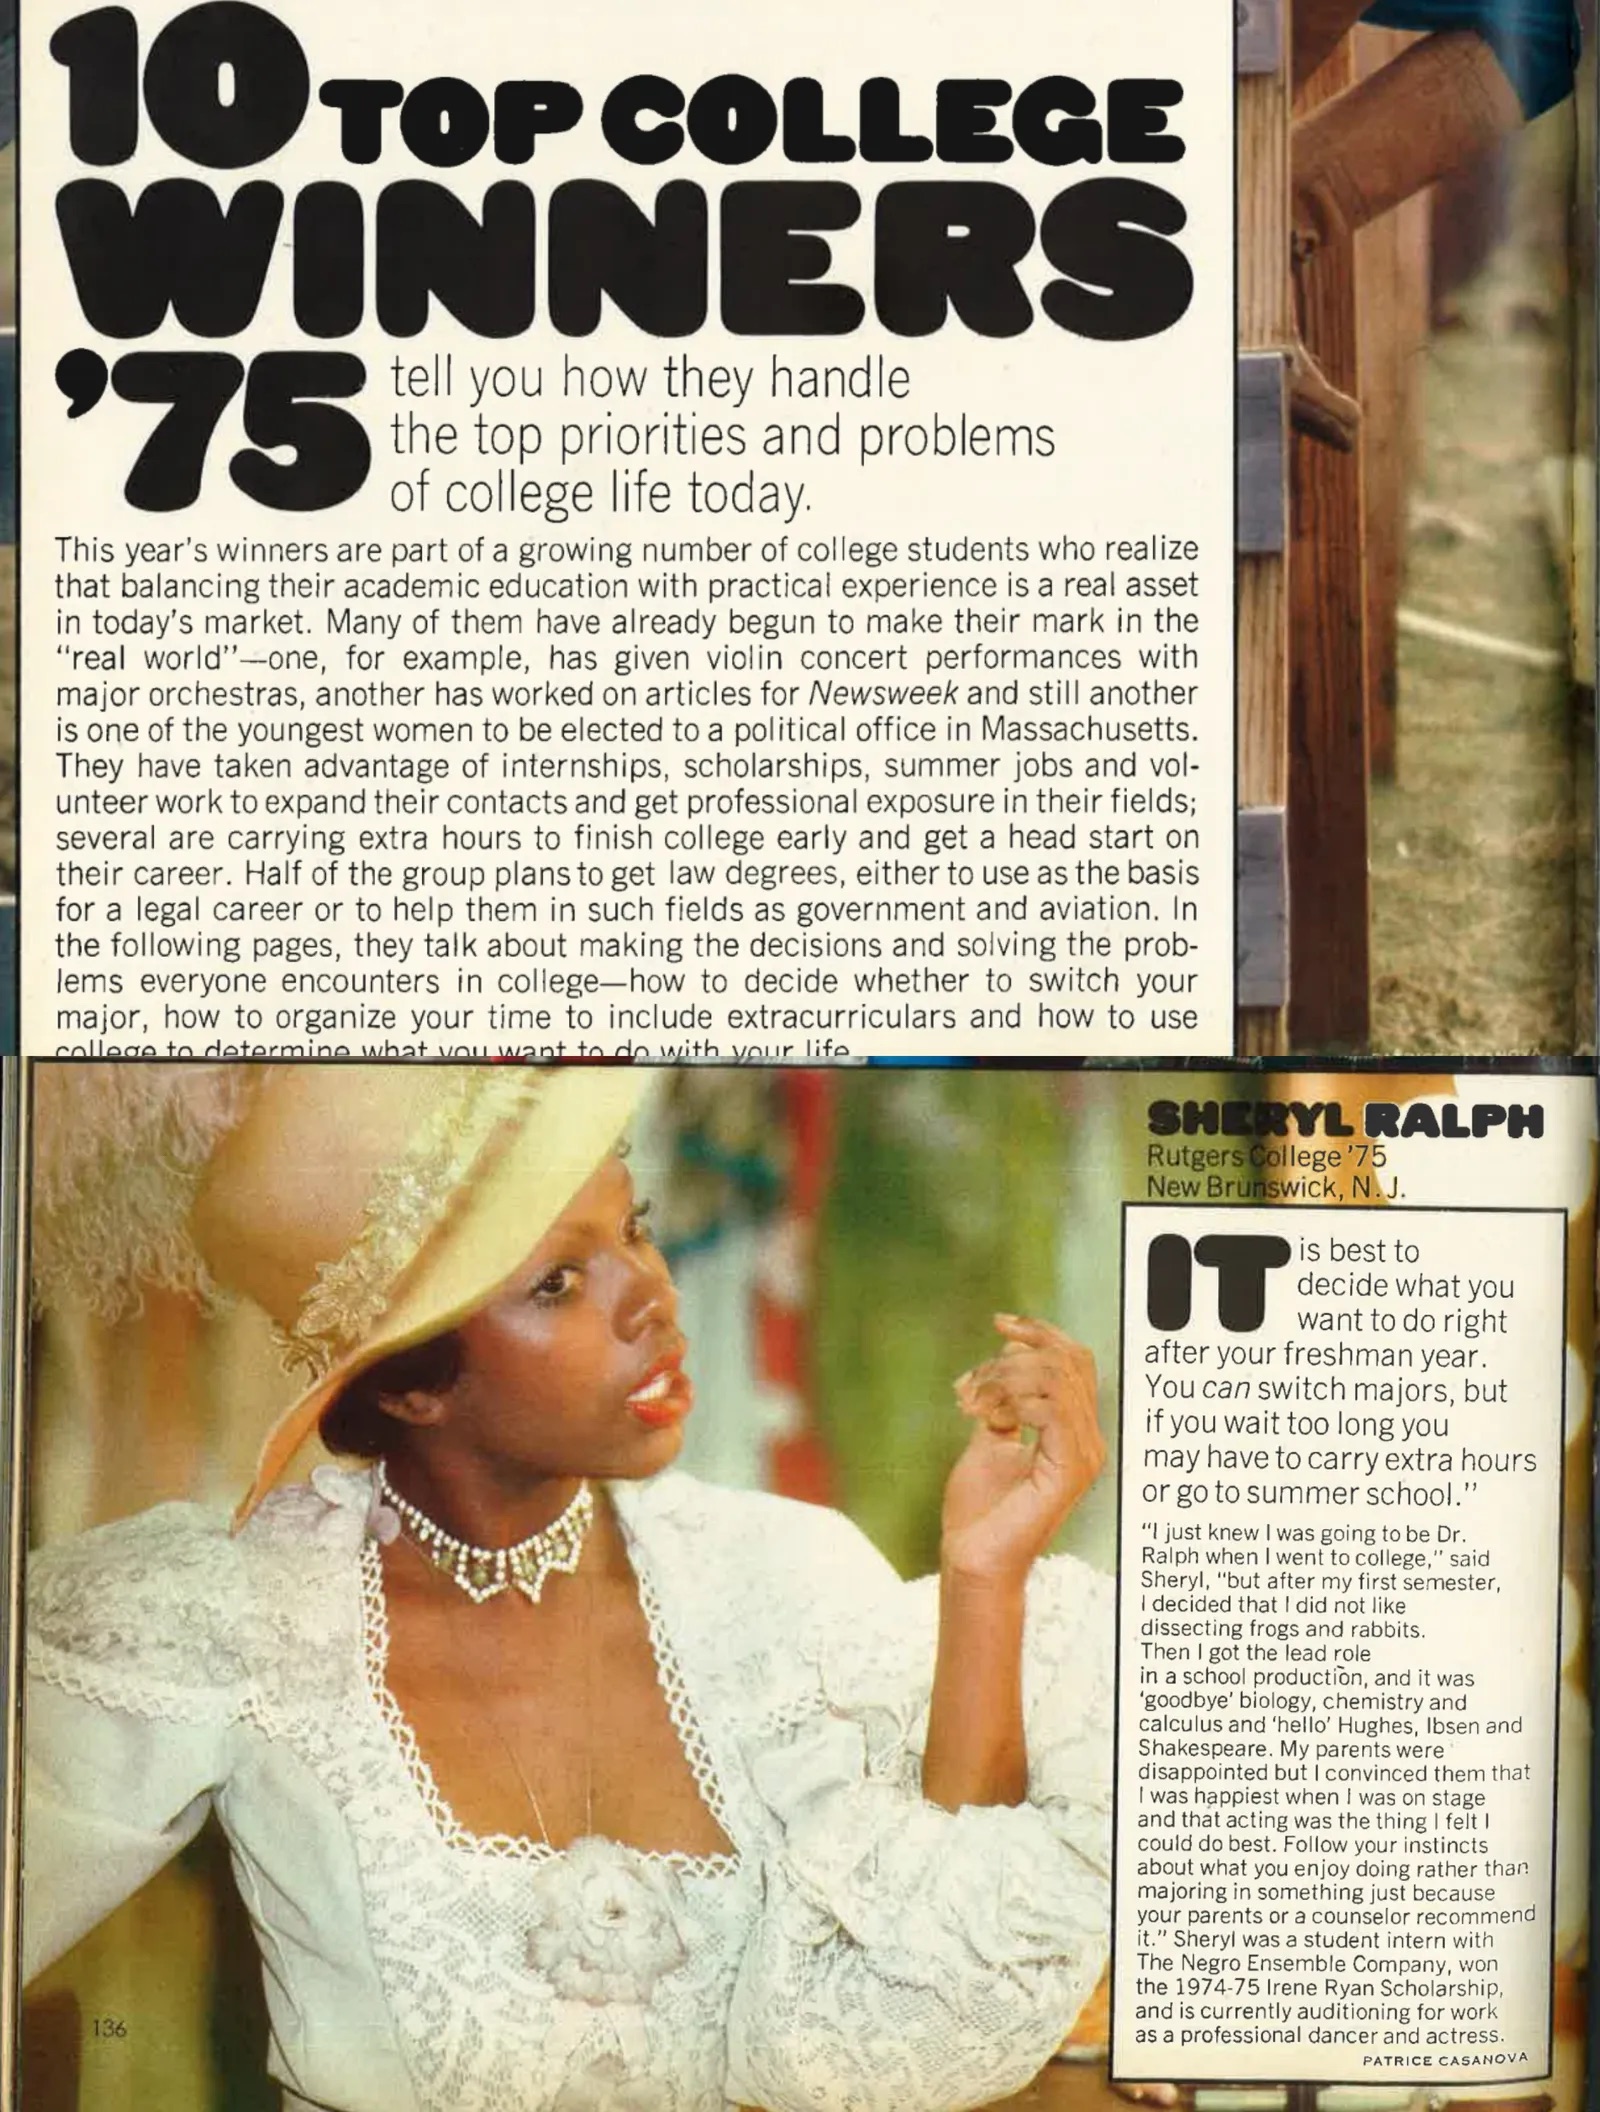 Sheryl Lee Ralph in Glamour Magazine courtesy of Patrice Casanova issued 1975